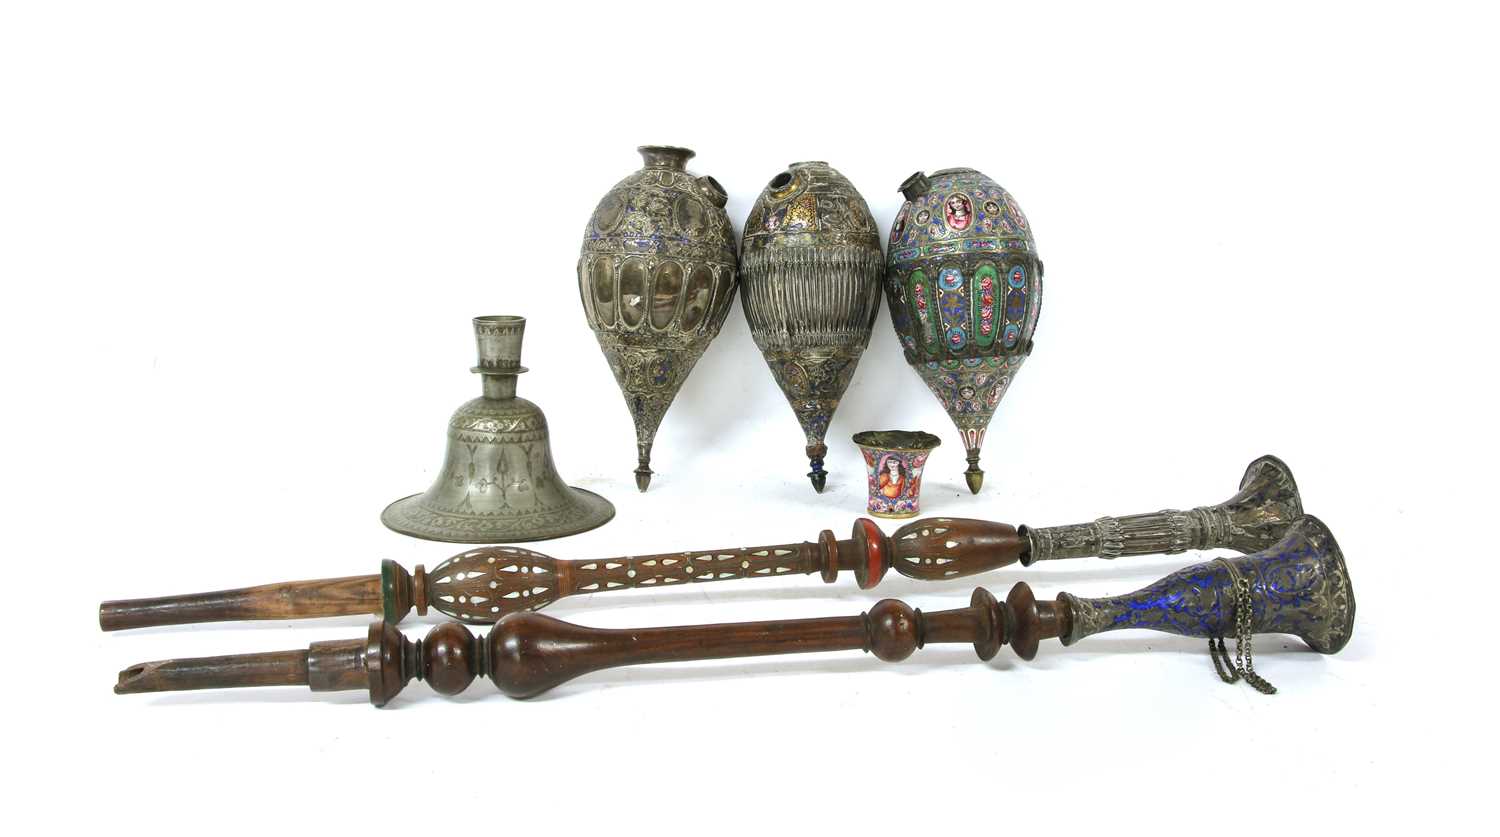 Lot 16 - Two Persian silver and enamelled narghile water pipes